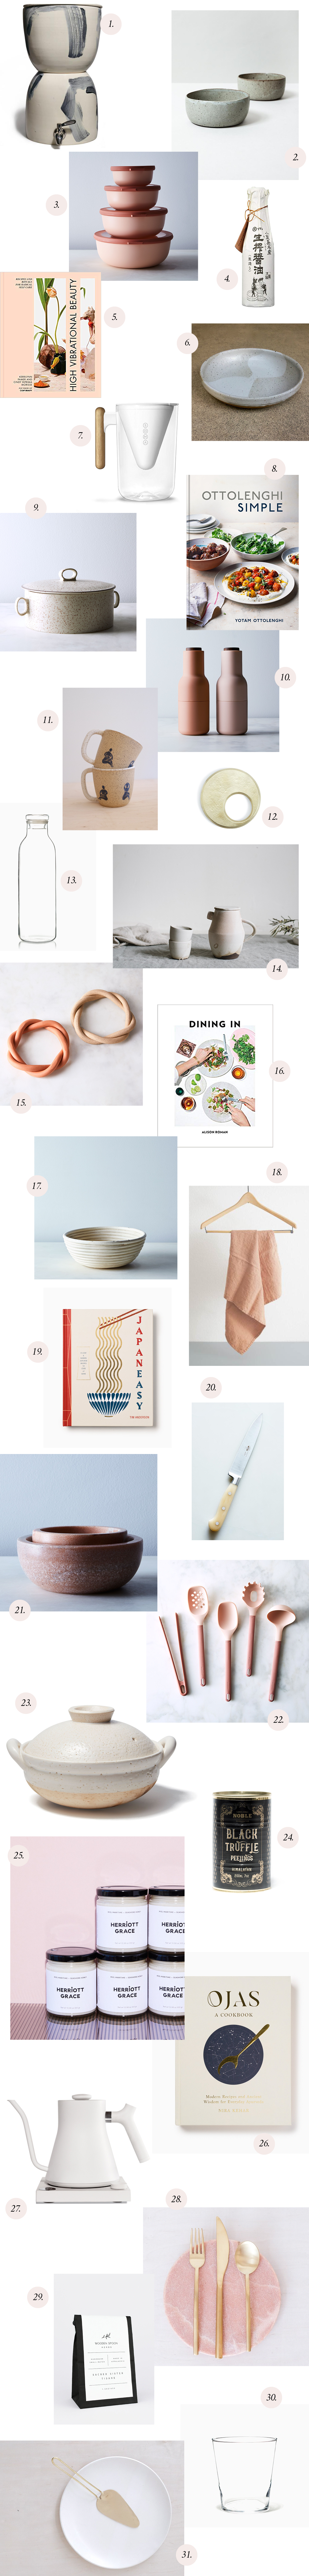 The 2018 Local Milk Blog Holiday and Christmas gift guide is full of beautiful, sustainable, minimalist, and hand-crafted ideas for the kitchen with ideas for the cook in your life to suit every budget. We have gifts from artisans, makers, small shops, designers, and more. 